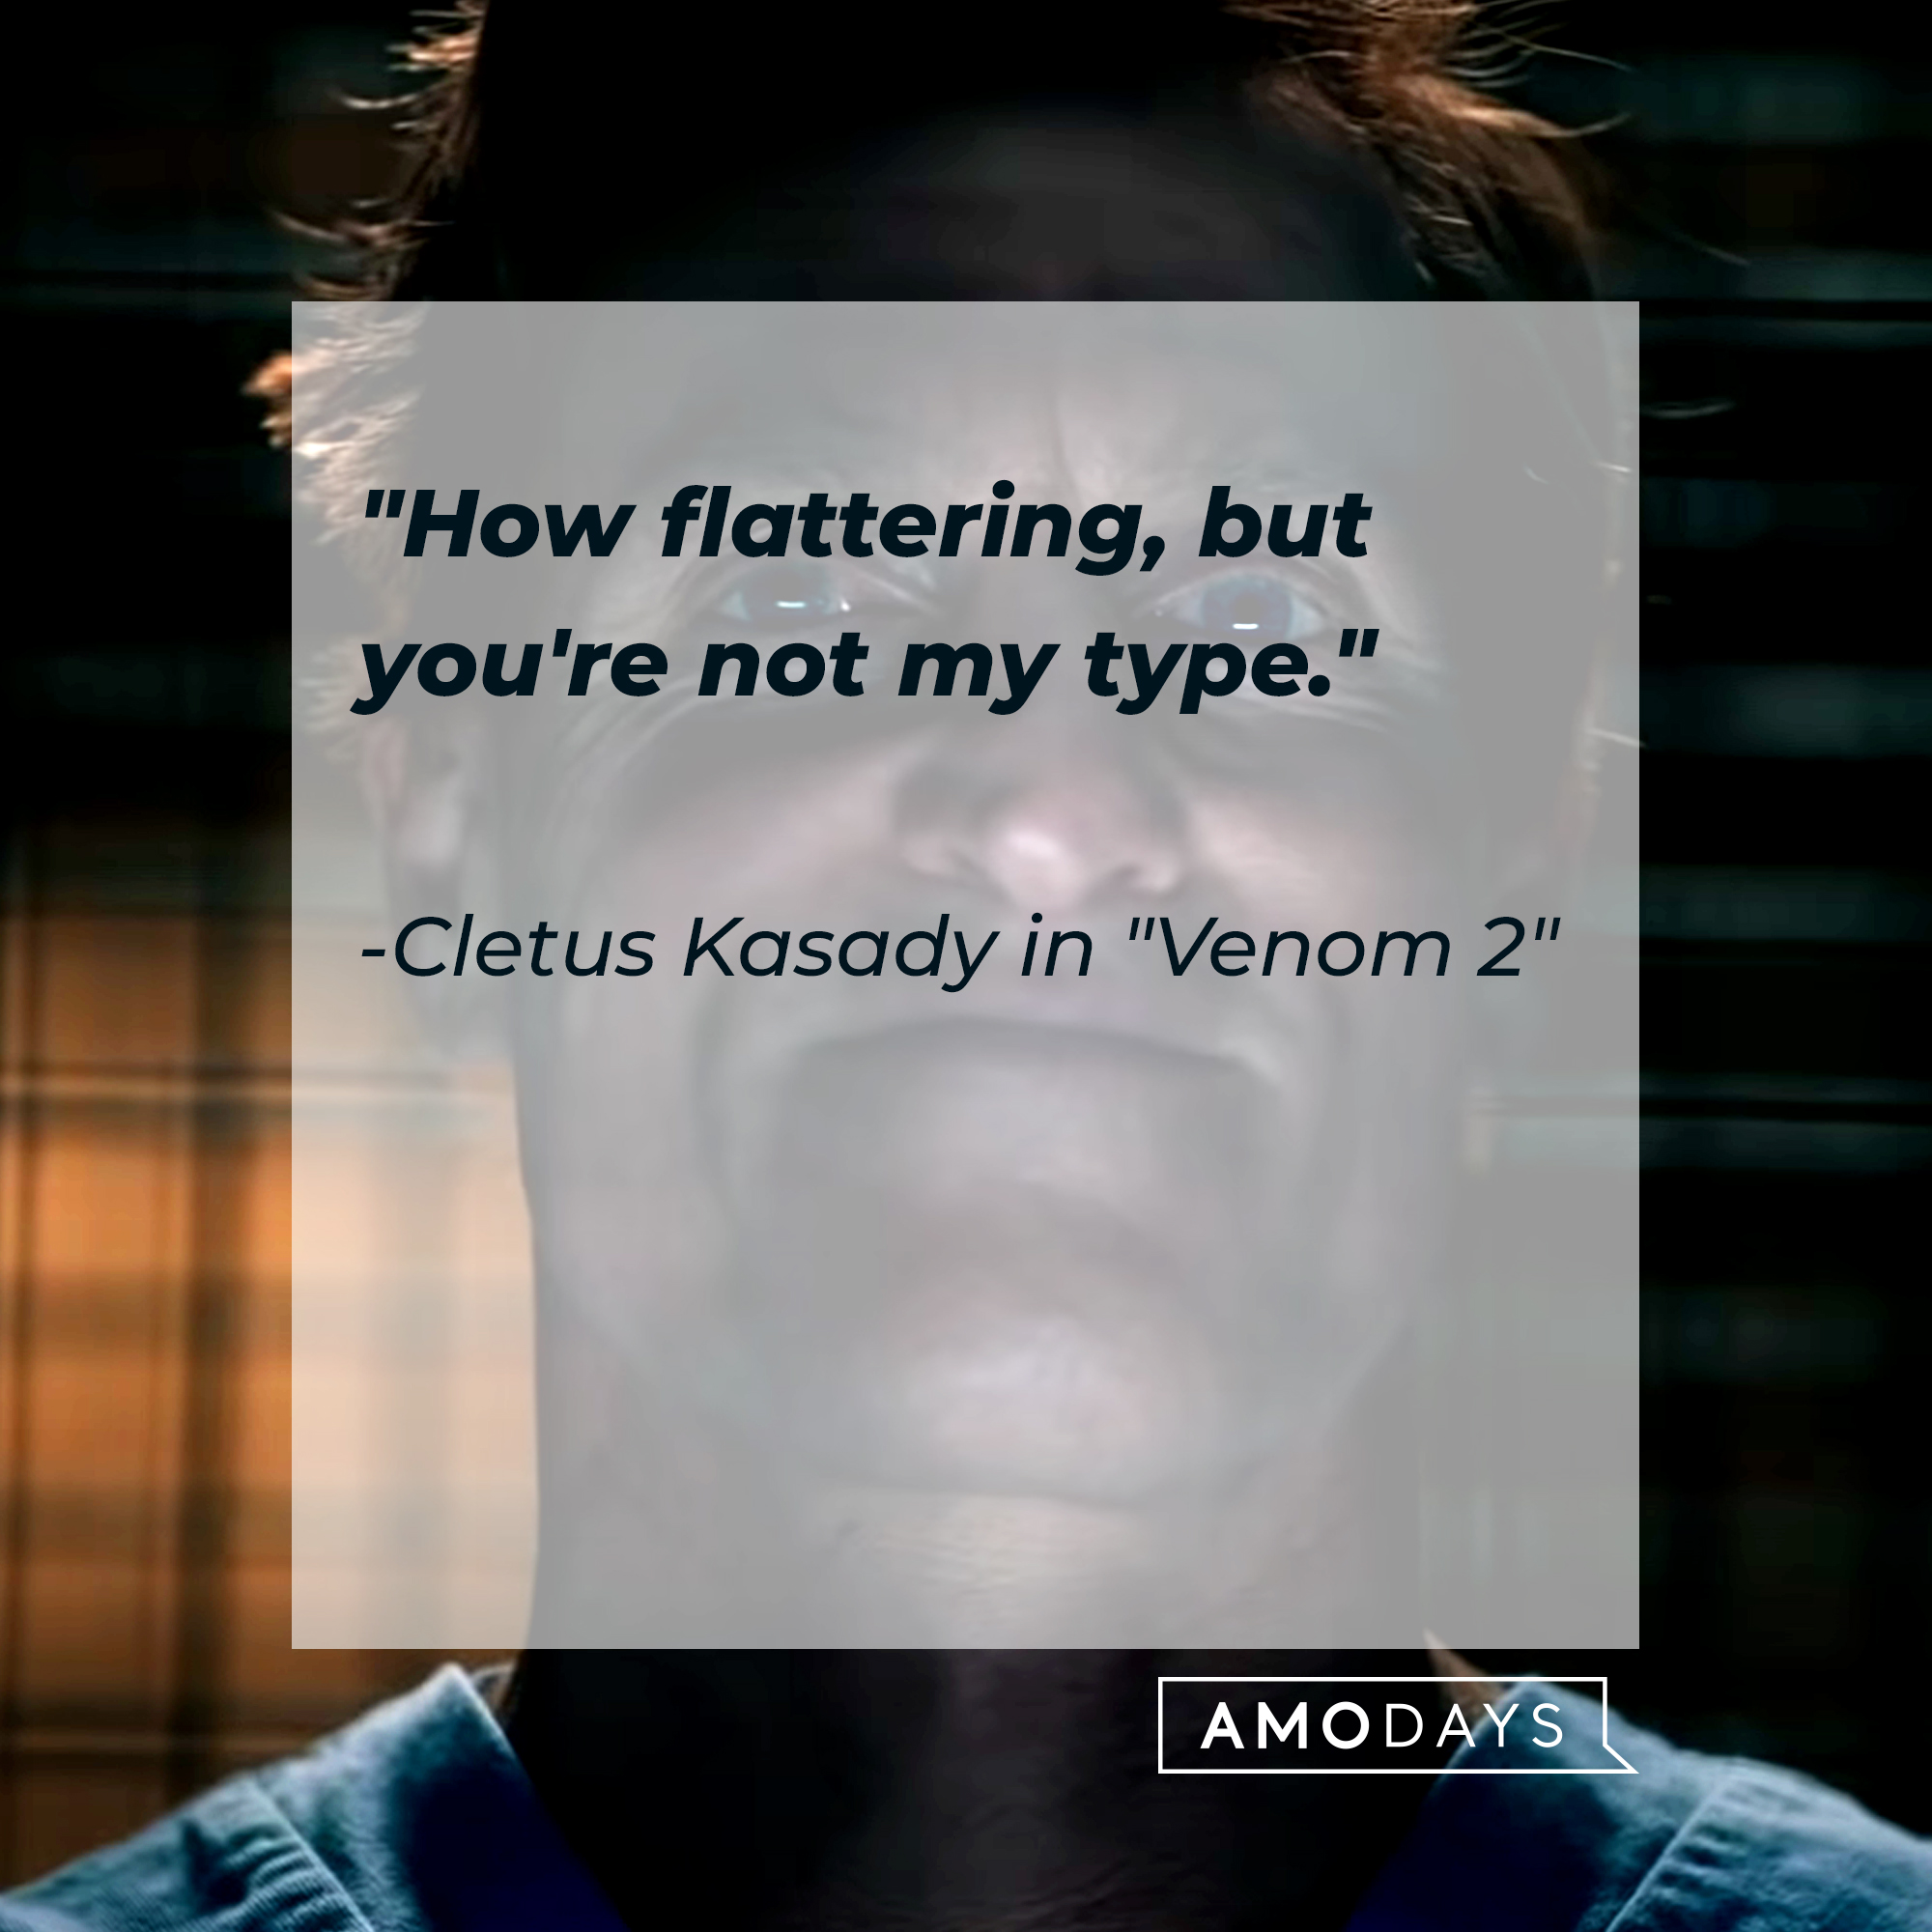 Cletus Kasady with his quote, "How flattering, but you're not my type." | Source: YouTube/sonypictures